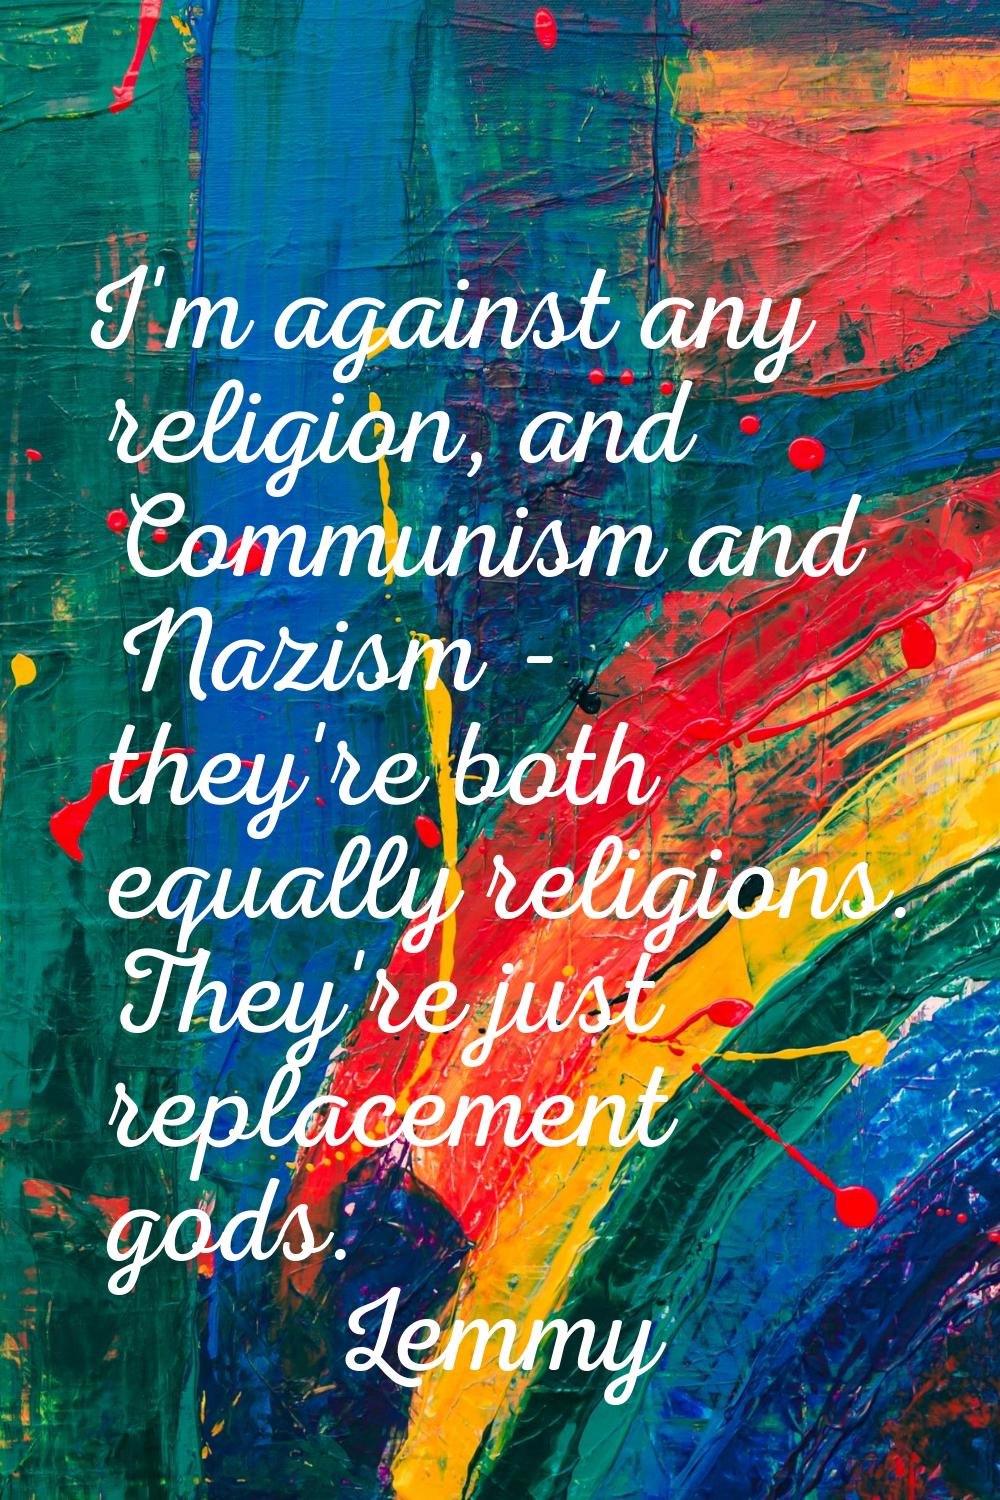 I'm against any religion, and Communism and Nazism - they're both equally religions. They're just r